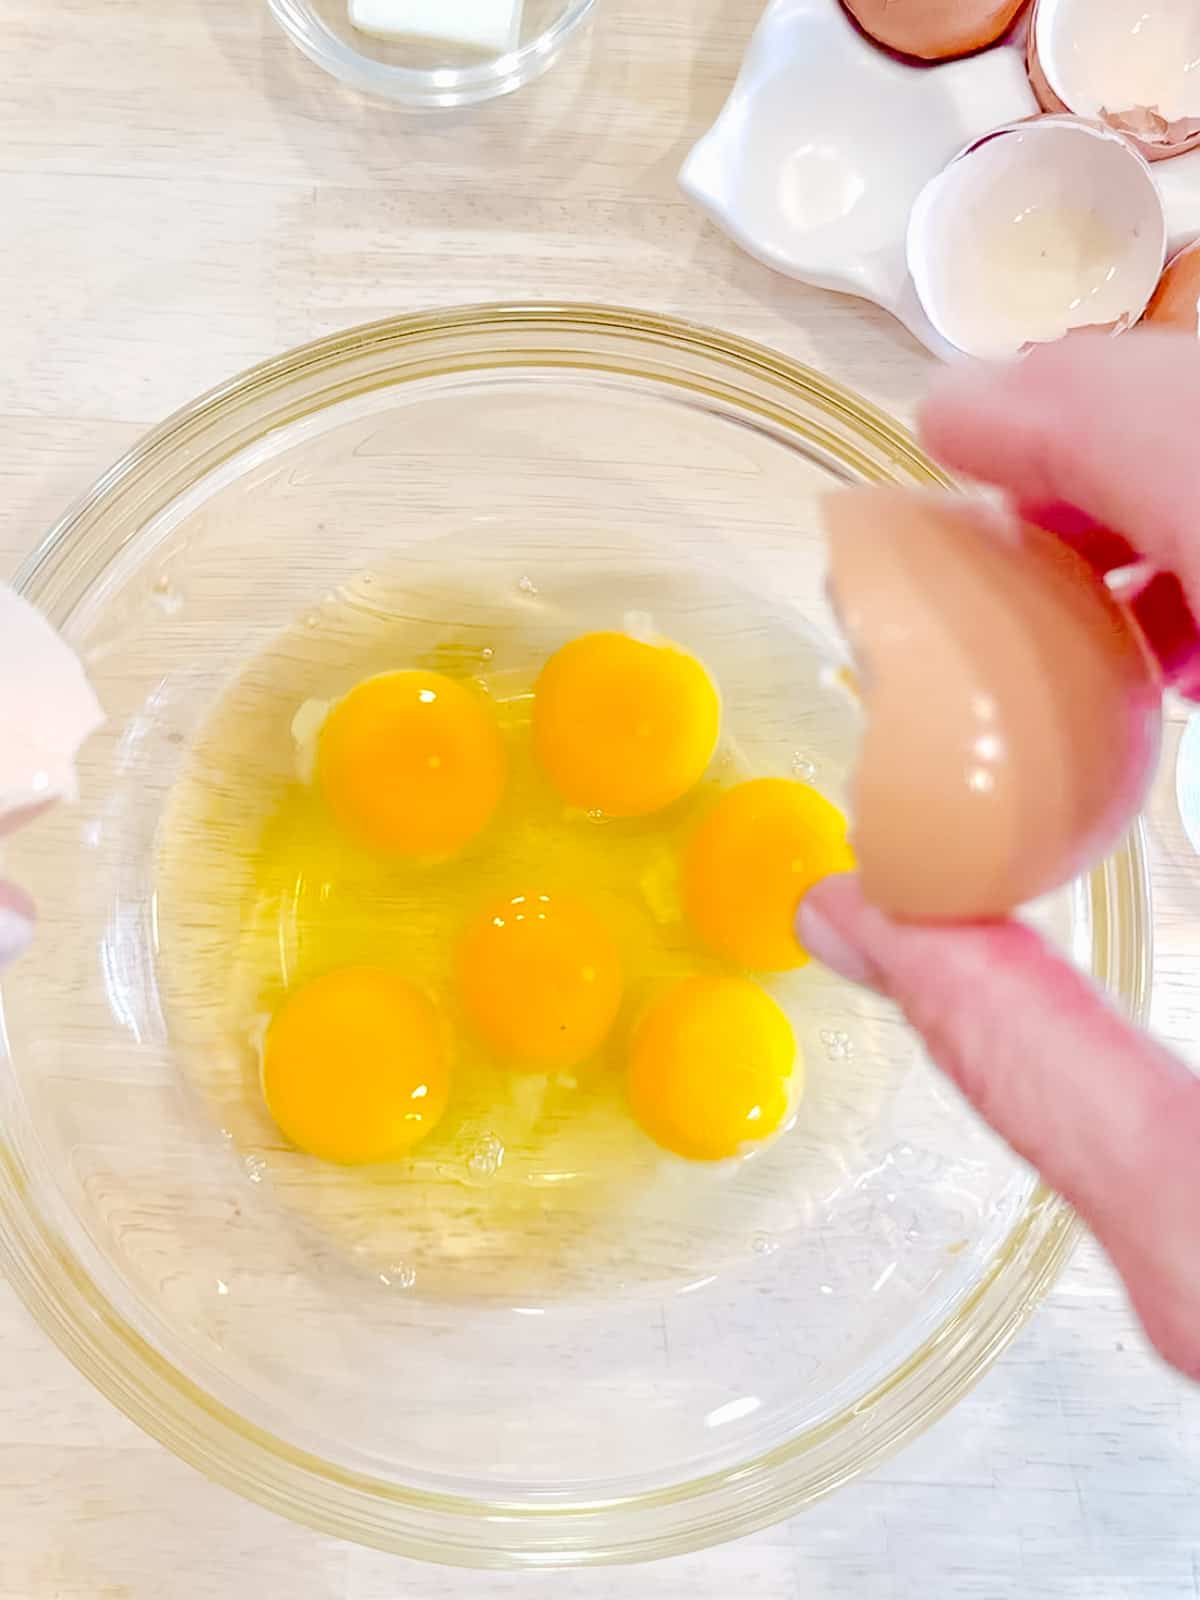 Cracking six eggs into a glass bowl.